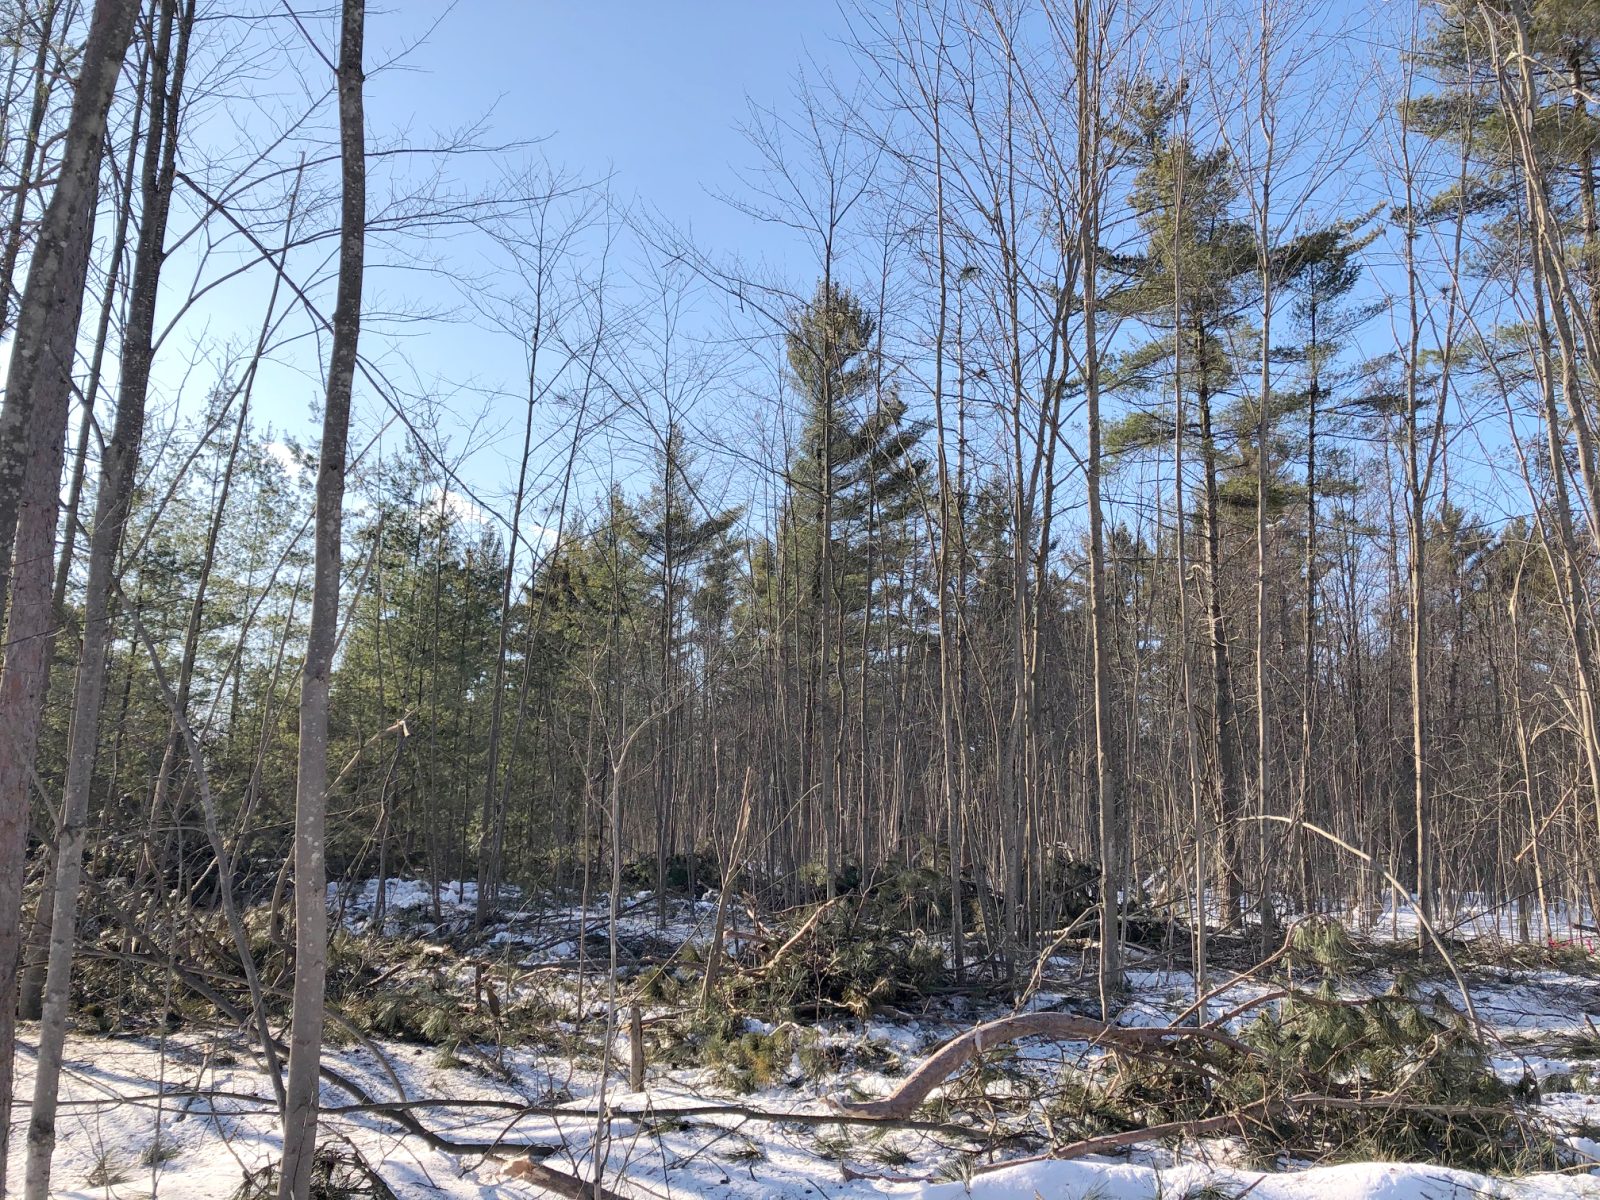 Salvage logging needed to protect red pine in Larose Forest says UCPR